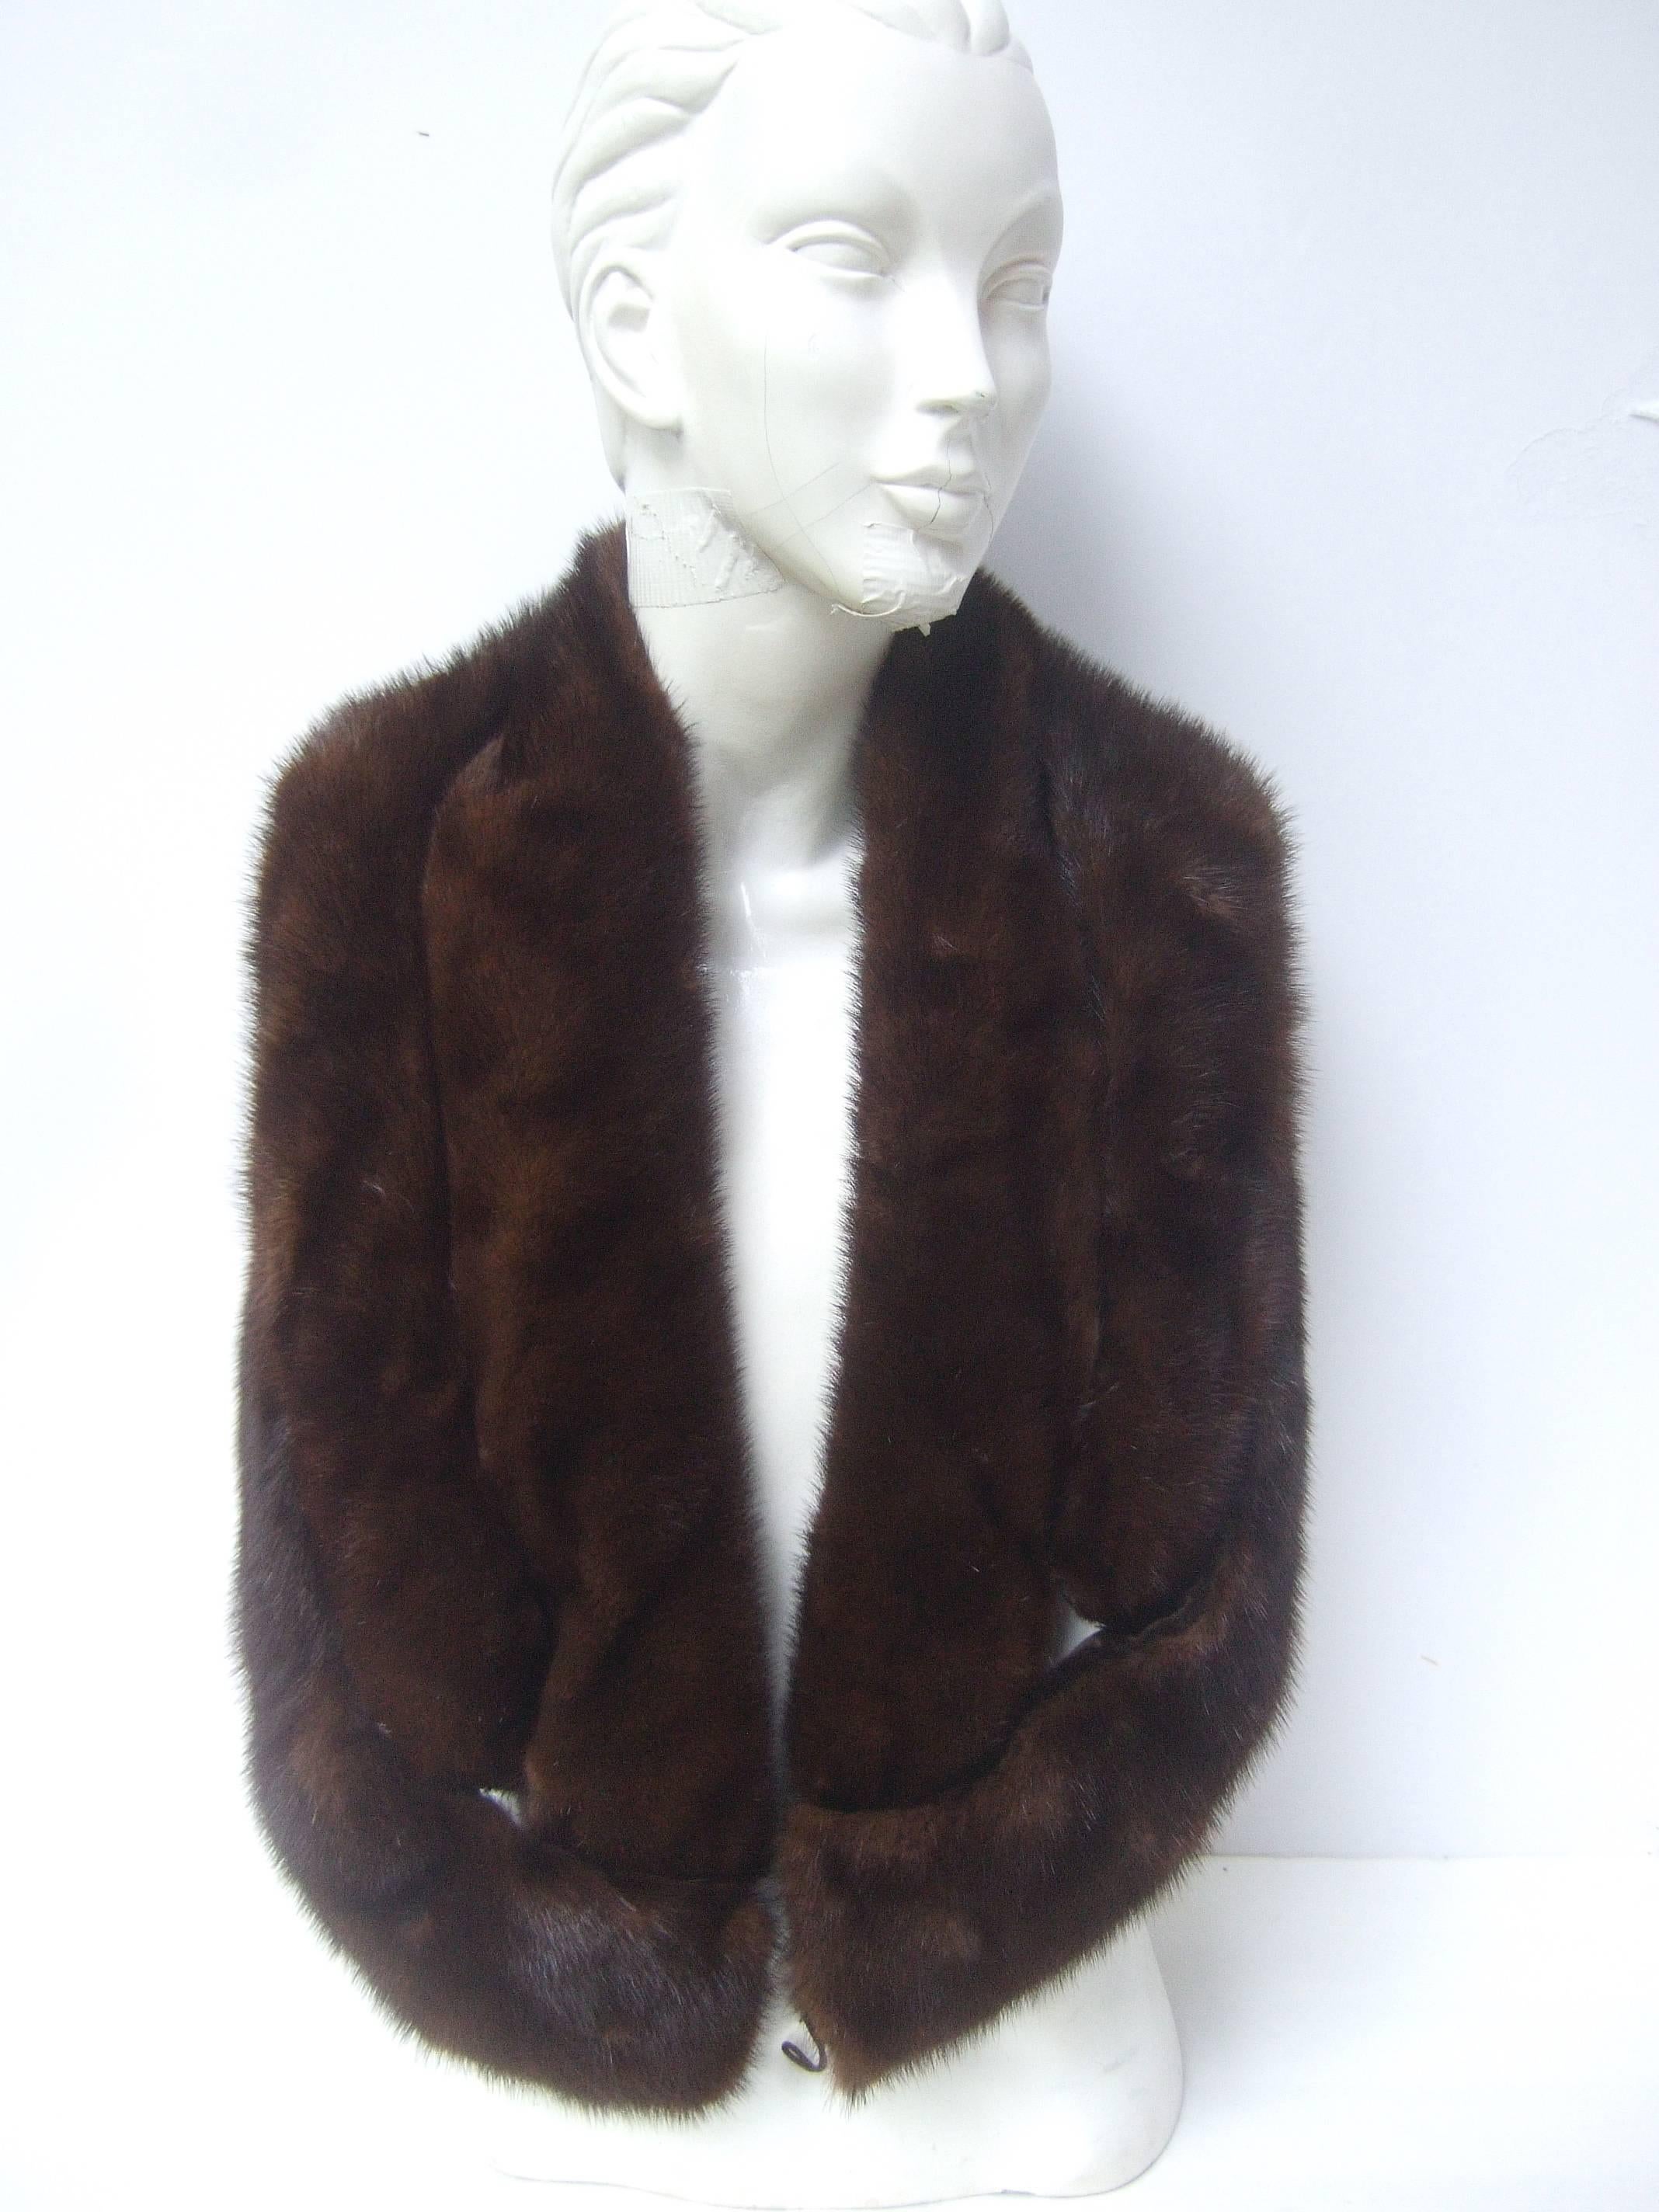 Luxurious plush triple band mink shrug c 1960
The chic mahogany ranch mink shrug
is designed with three rows of soft mink
on both ends. The center section is designed
with two panels of mink fur 

The mink bands are backed with brown velvet